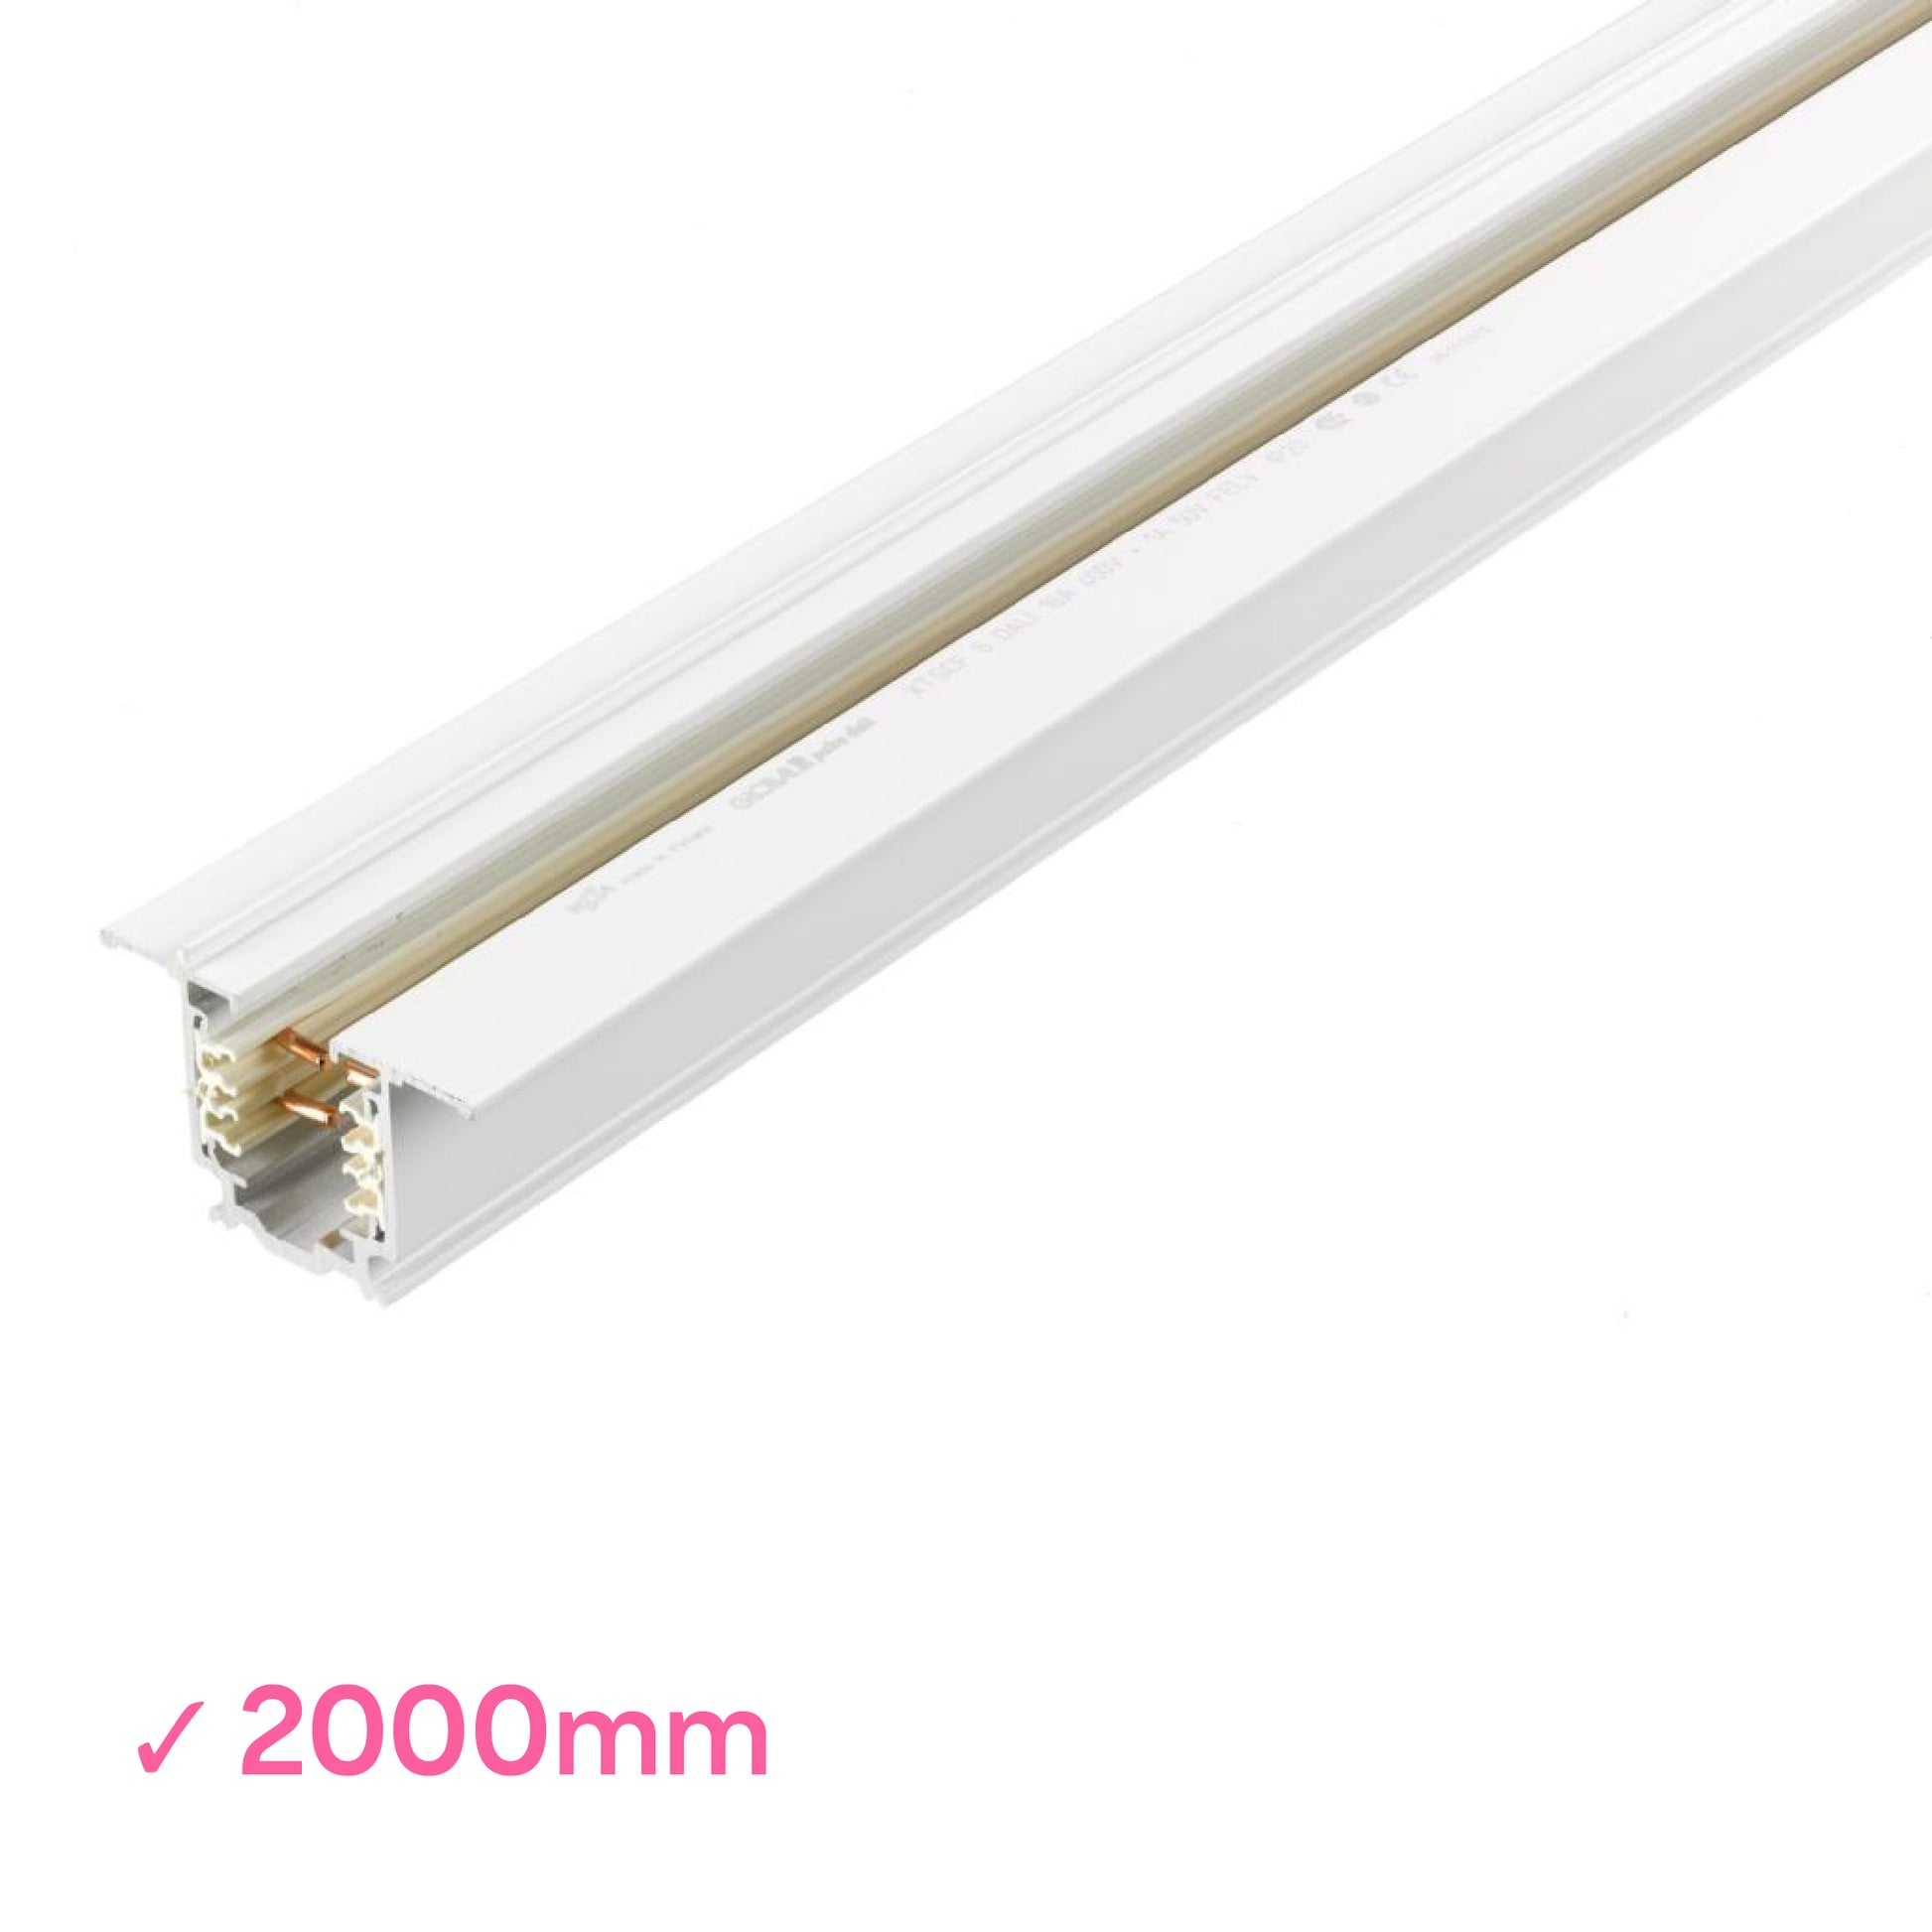 Global 2000mm or 2m white powder coated DALI 3 Circuit Track 2 metre recessed mounted track by Nordic Aluminium <XTSCF6200-3>